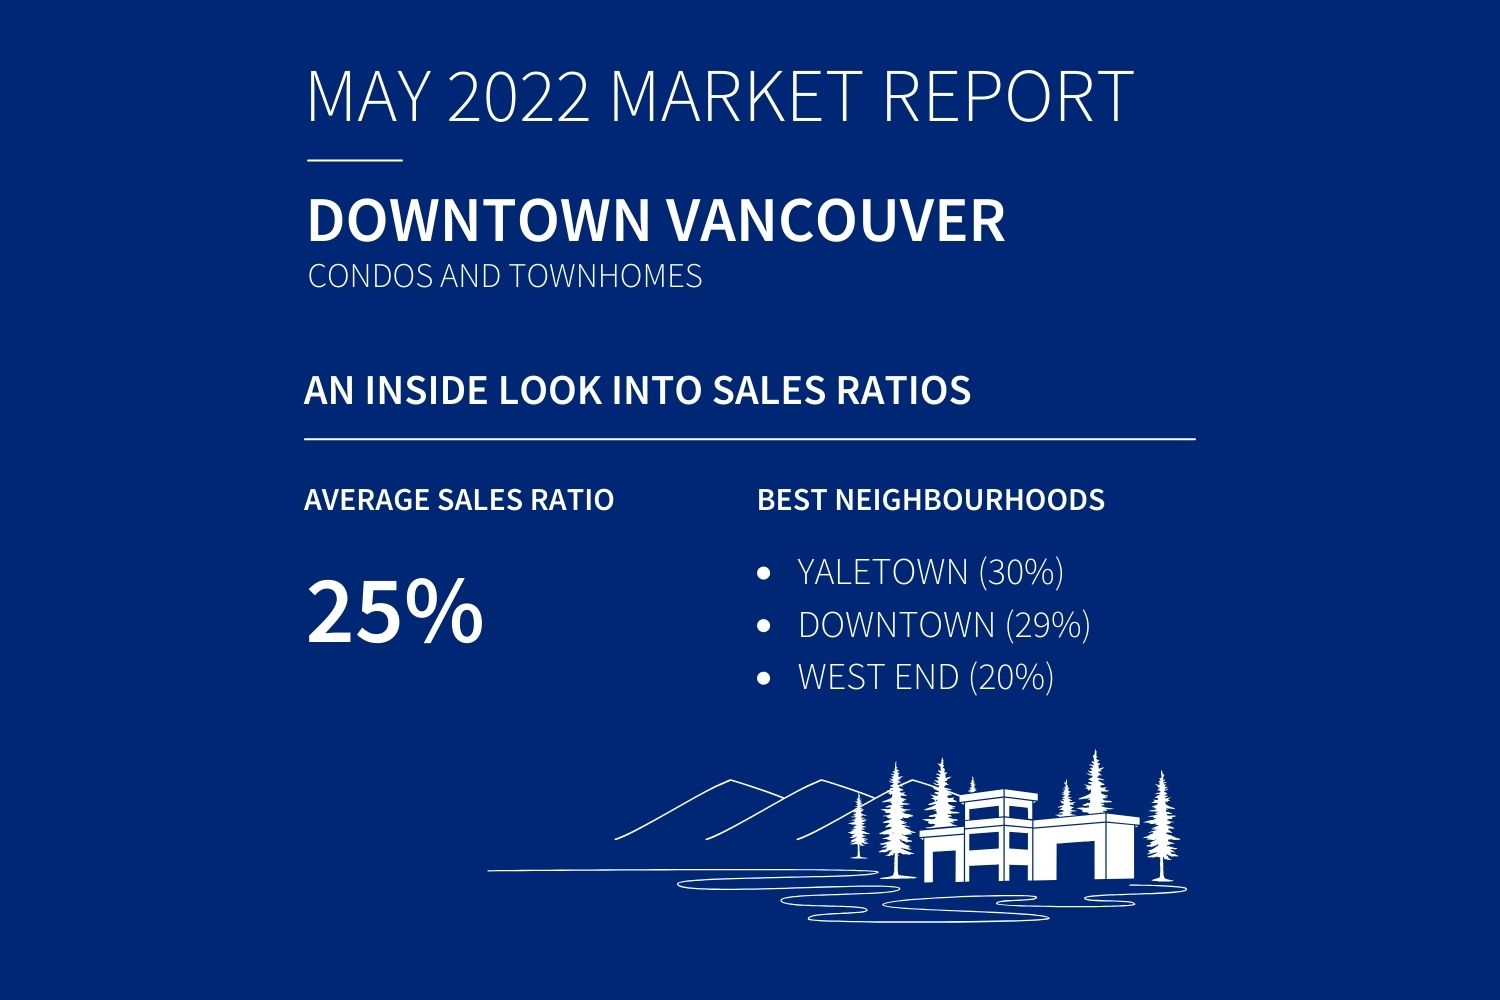 Downtown Vancouver Condos and Townhomes 